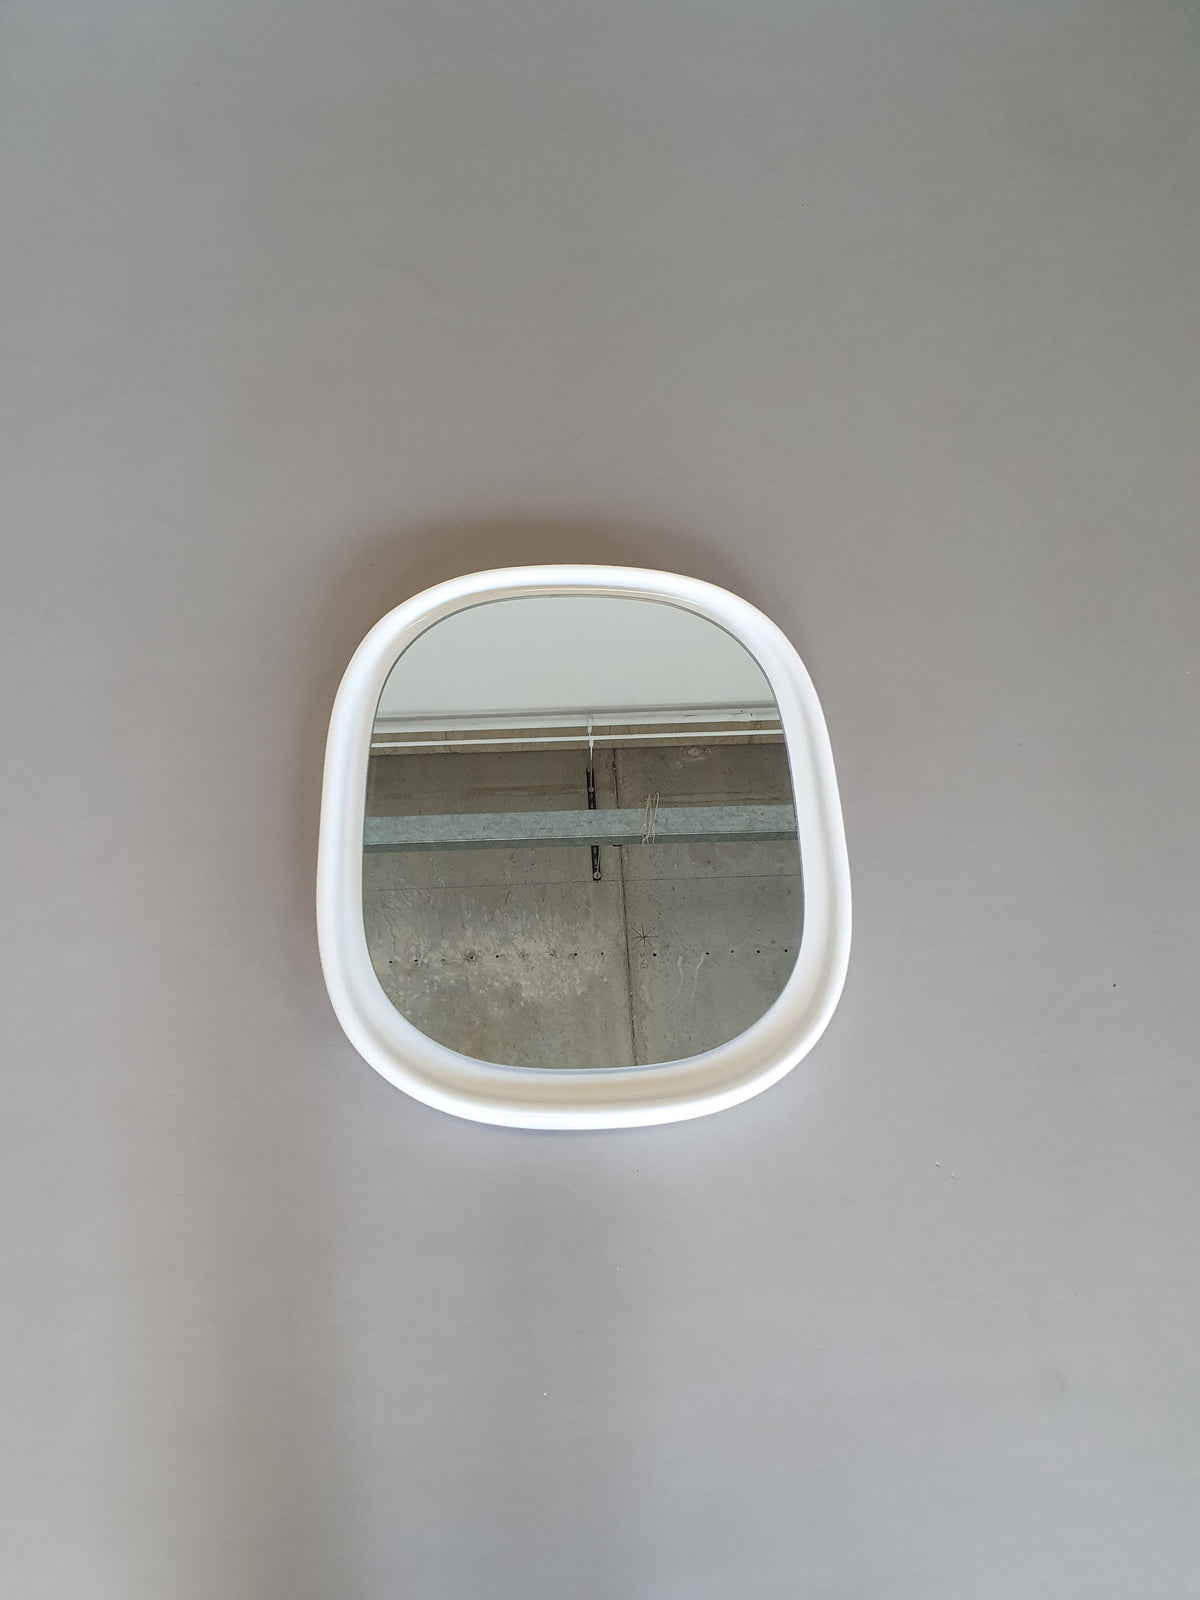 Set of 2 ceramic mirrors made by Sphinx Holland. Optically floating mirror in a white ceramic fame. Some wear on the edge of one mirror rest in very good vintage condition.